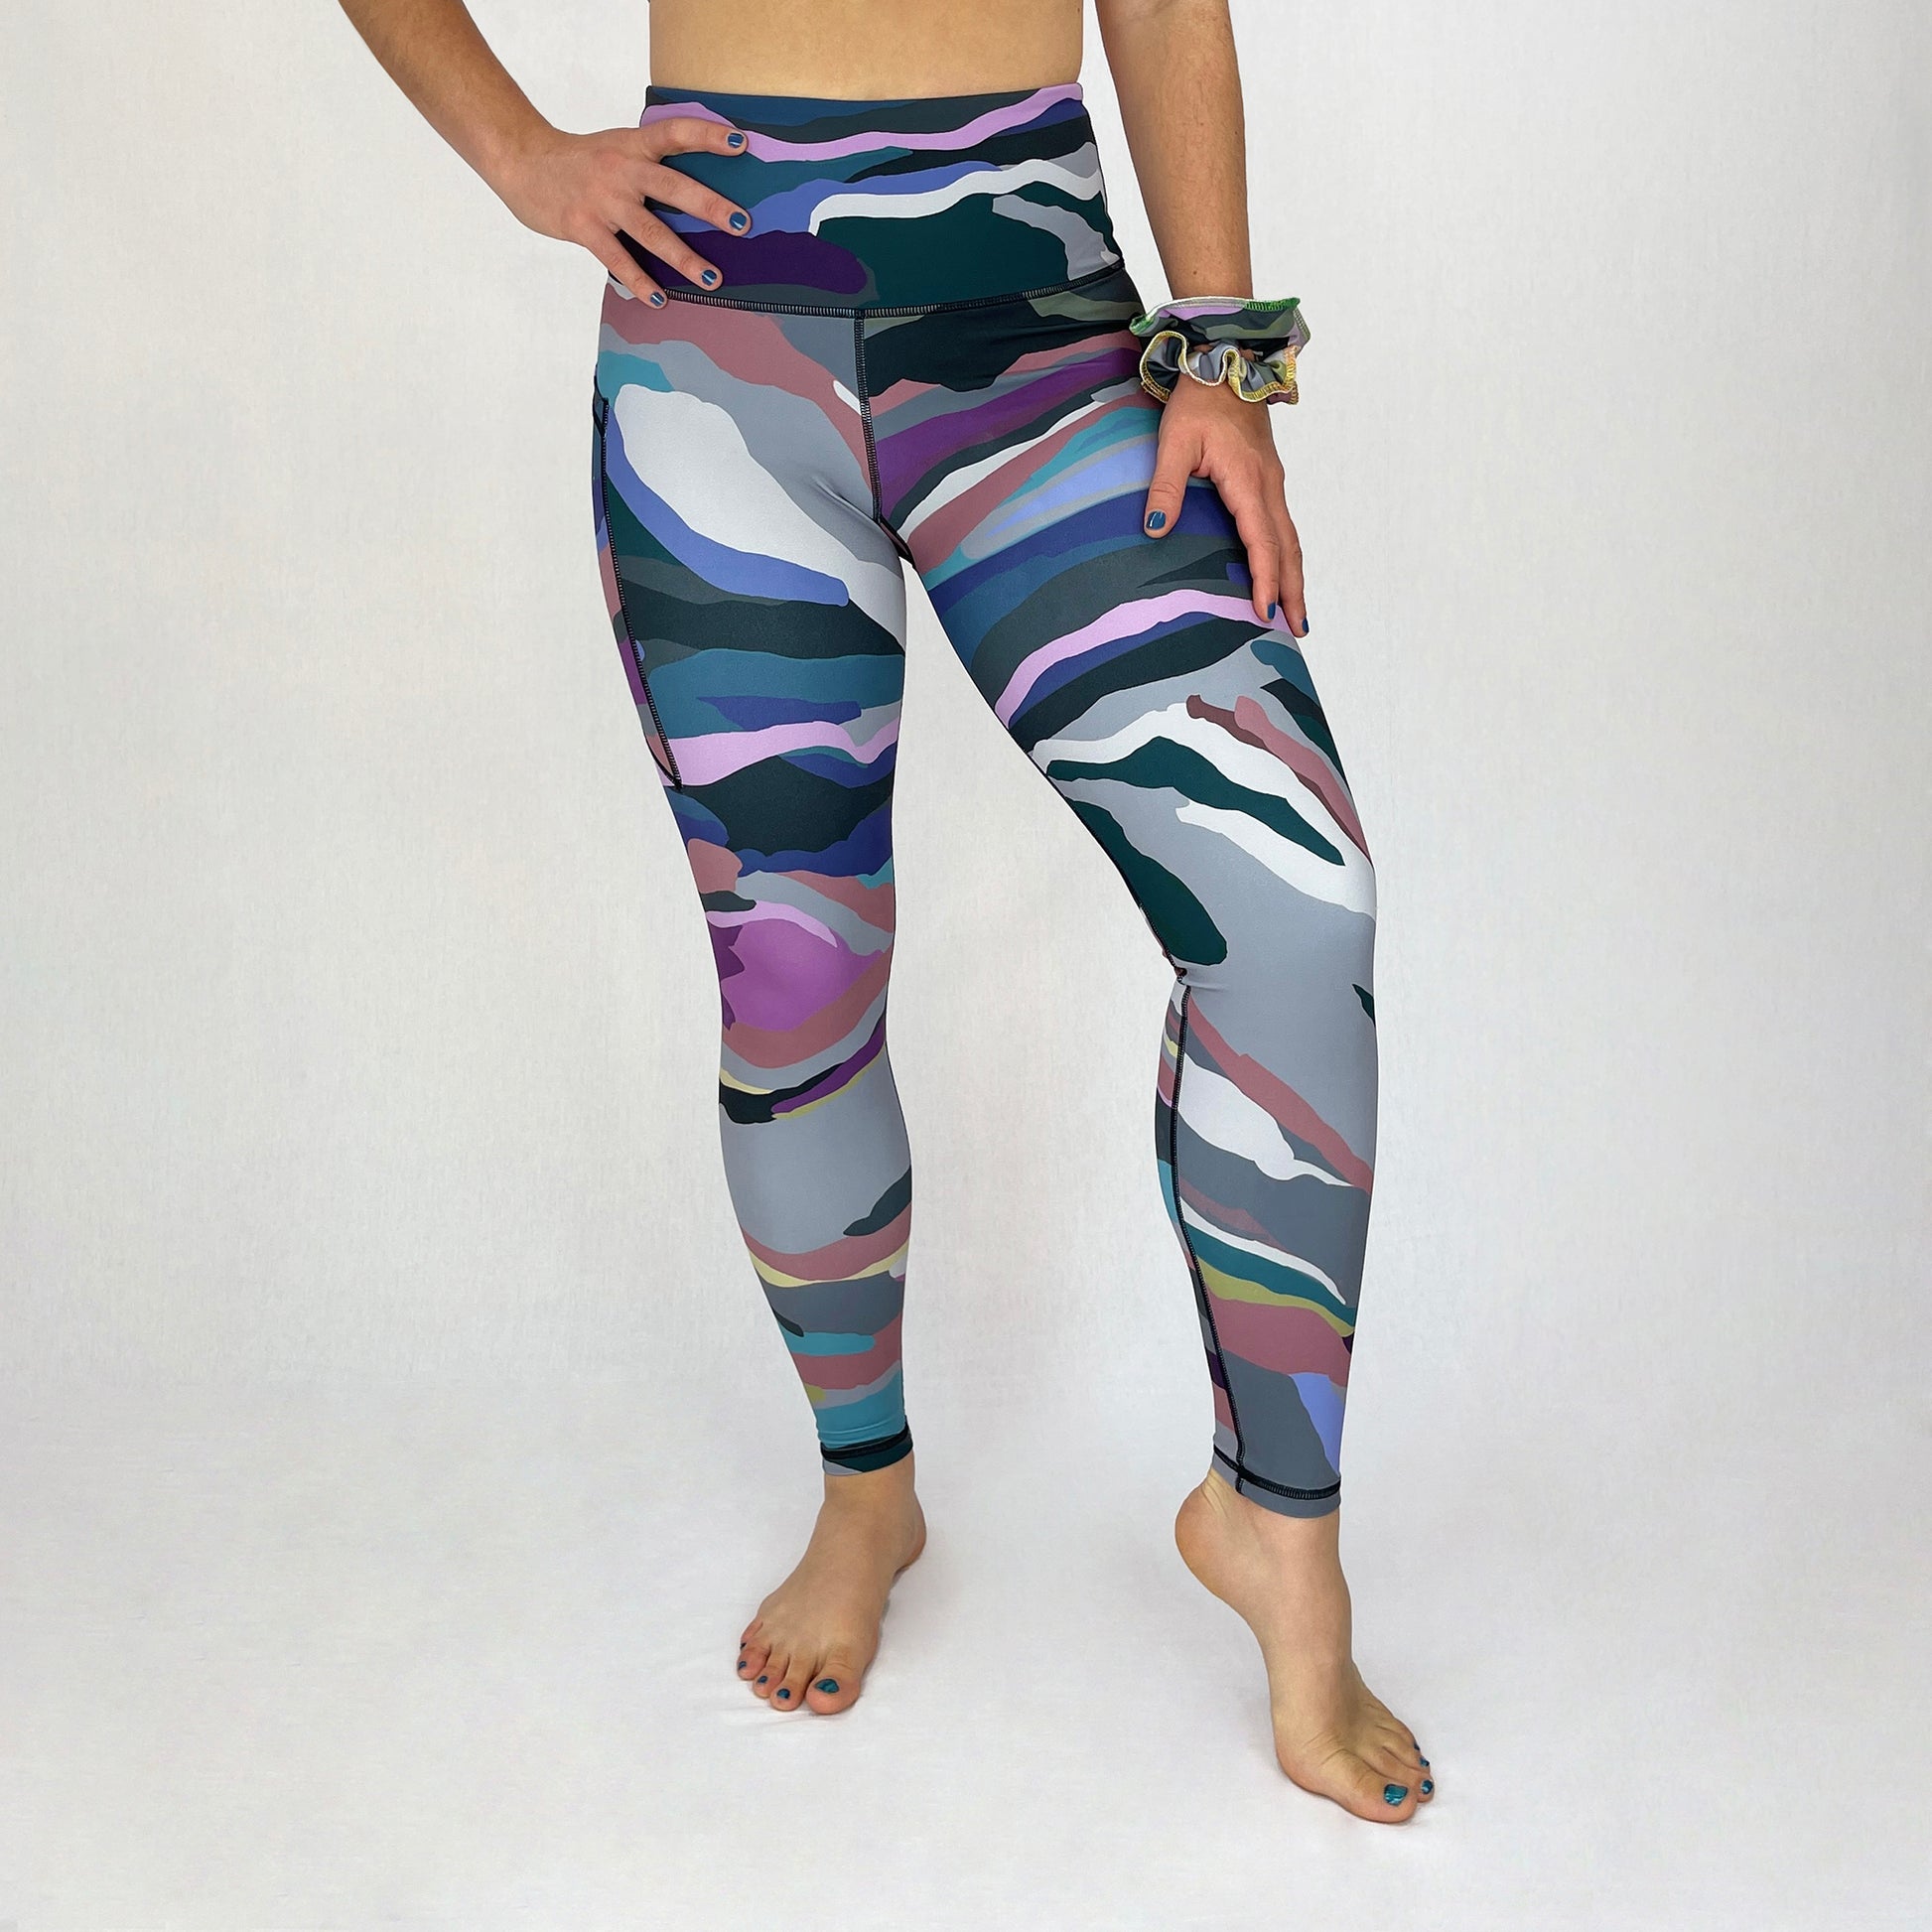 colourful high rise leggings with pockets made sustainably from recycled materials - purple camouflage front